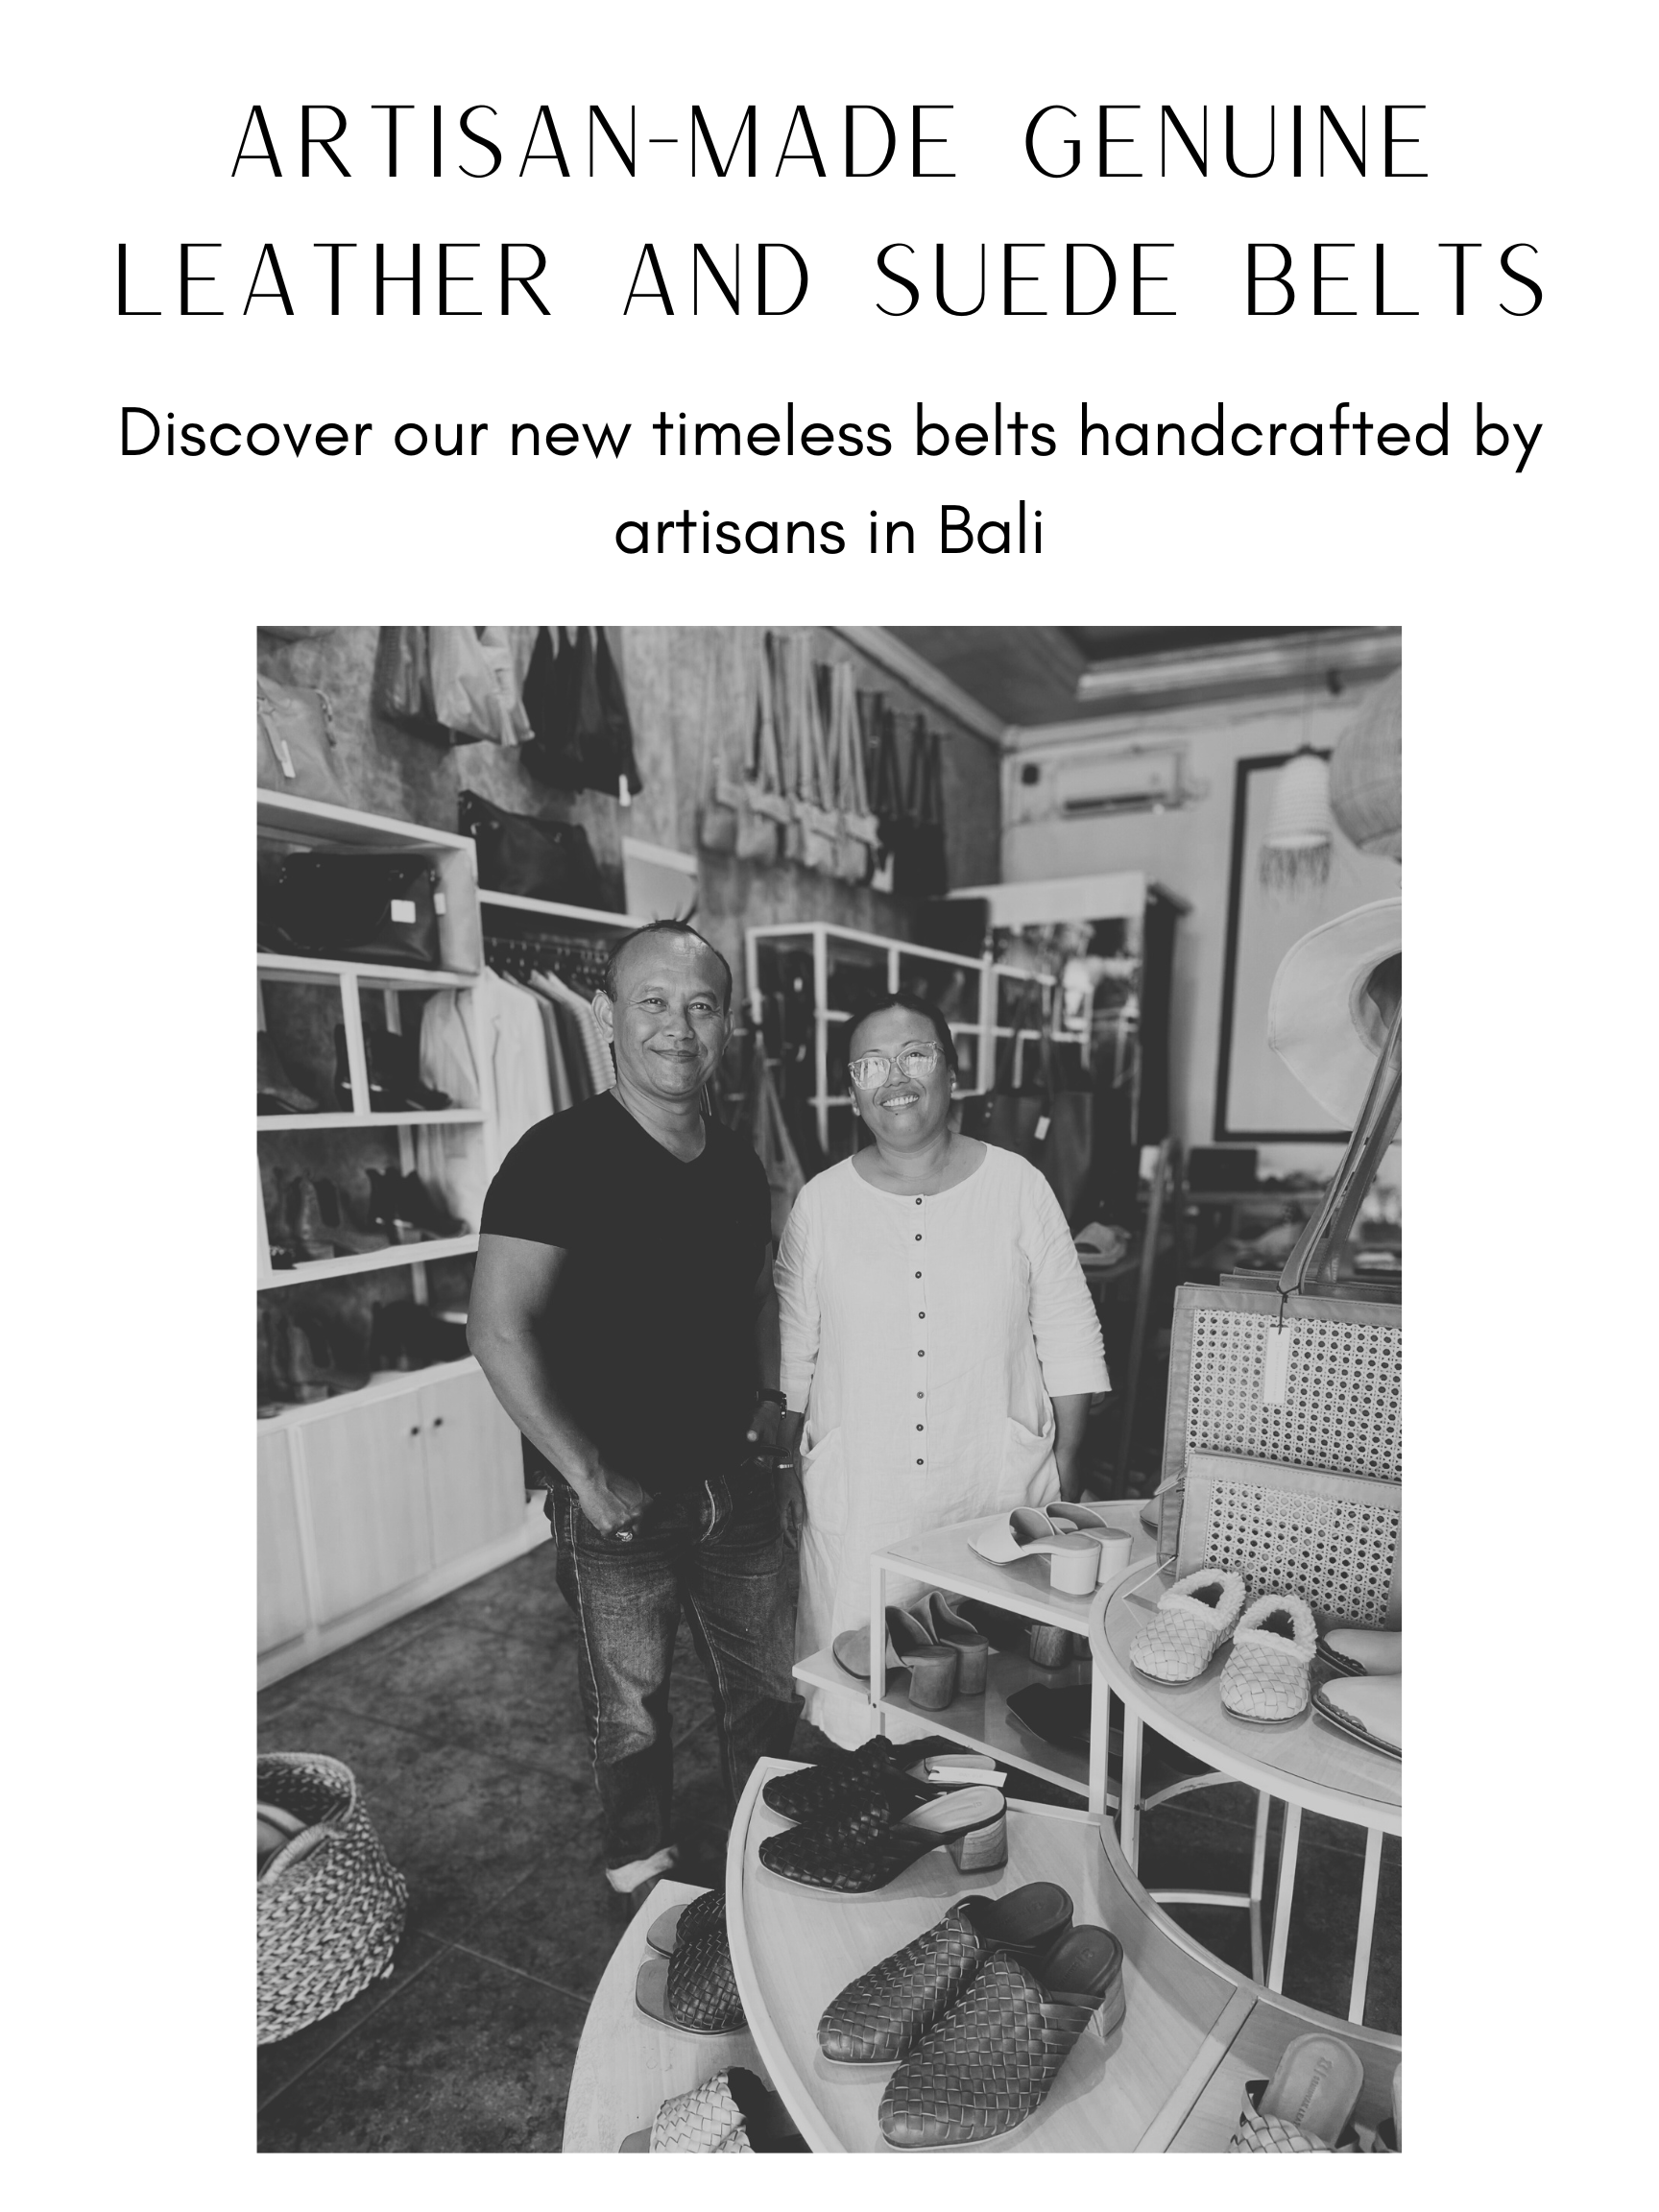 Paneros Launches Artisan-Made Genuine Leather & Suede Belts